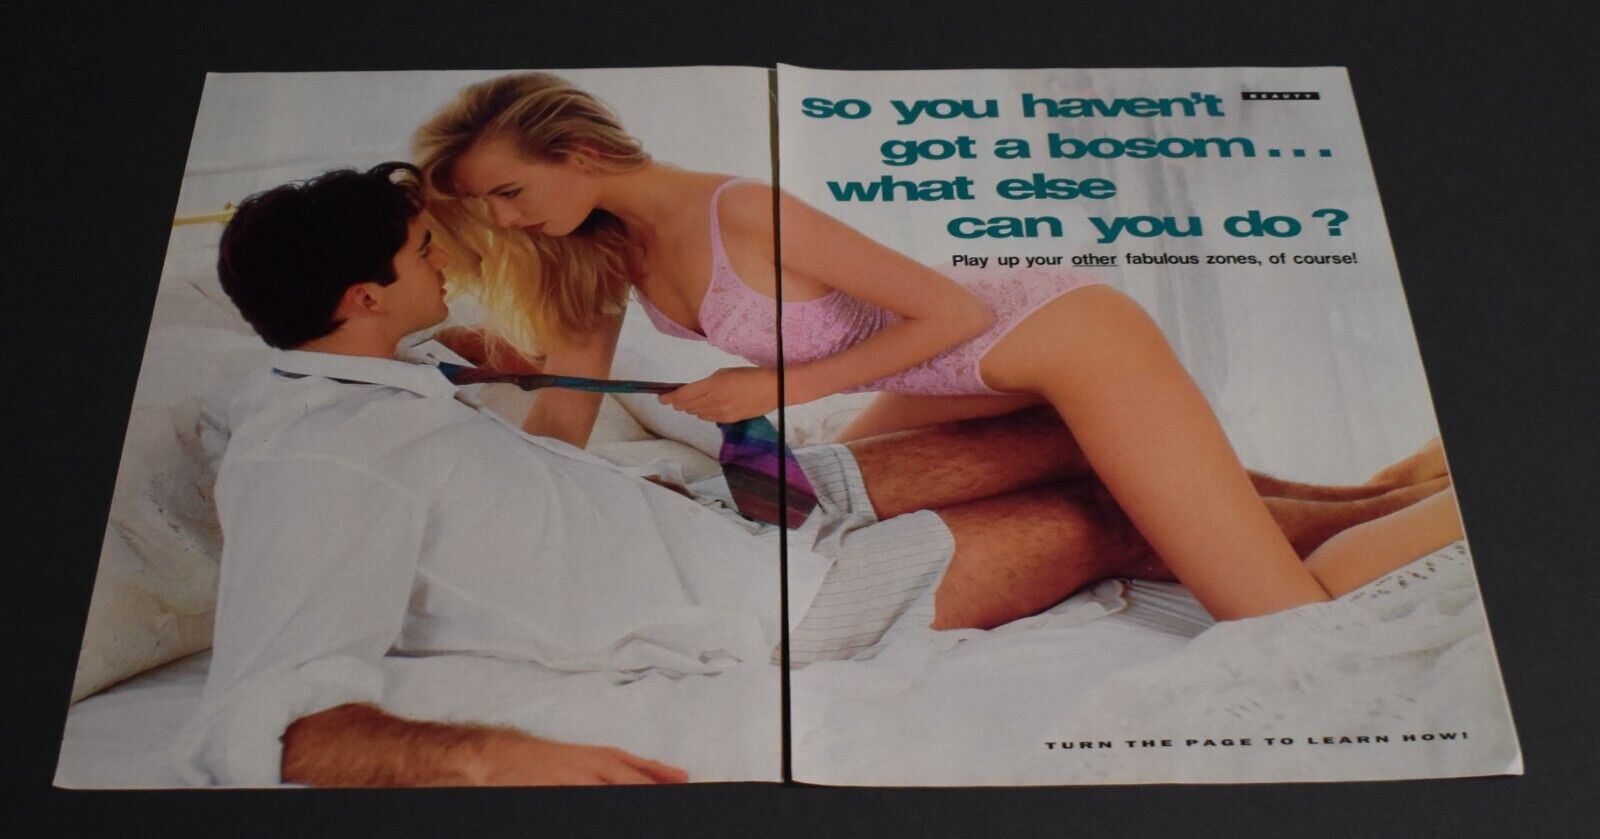 1994 Print Ad Sexy Play Fabulous Zones Lady Man Play Blonde Long Legs Art Style